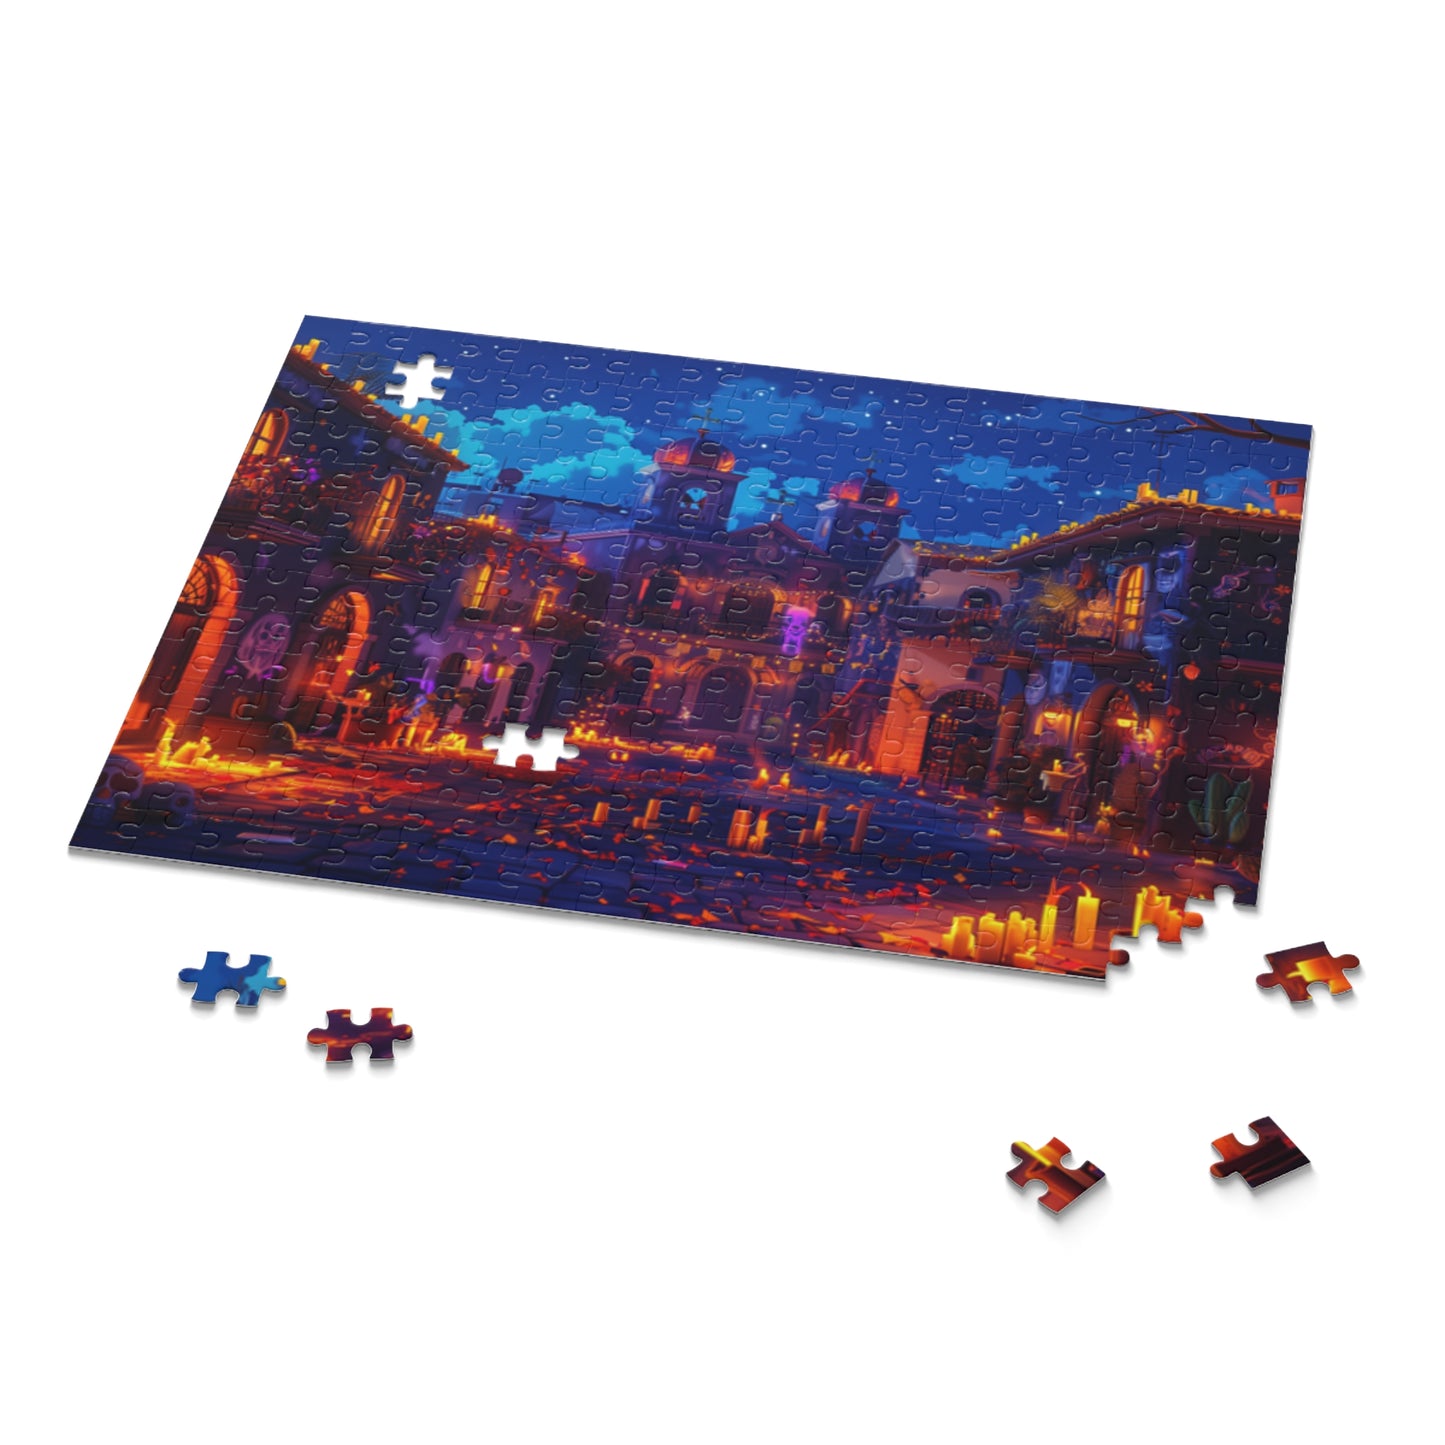 Mexican Art Candle Night Church Retro Jigsaw Puzzle Adult Birthday Business Jigsaw Puzzle Gift for Him Funny Humorous Indoor Outdoor Game Gift For Her Online-9